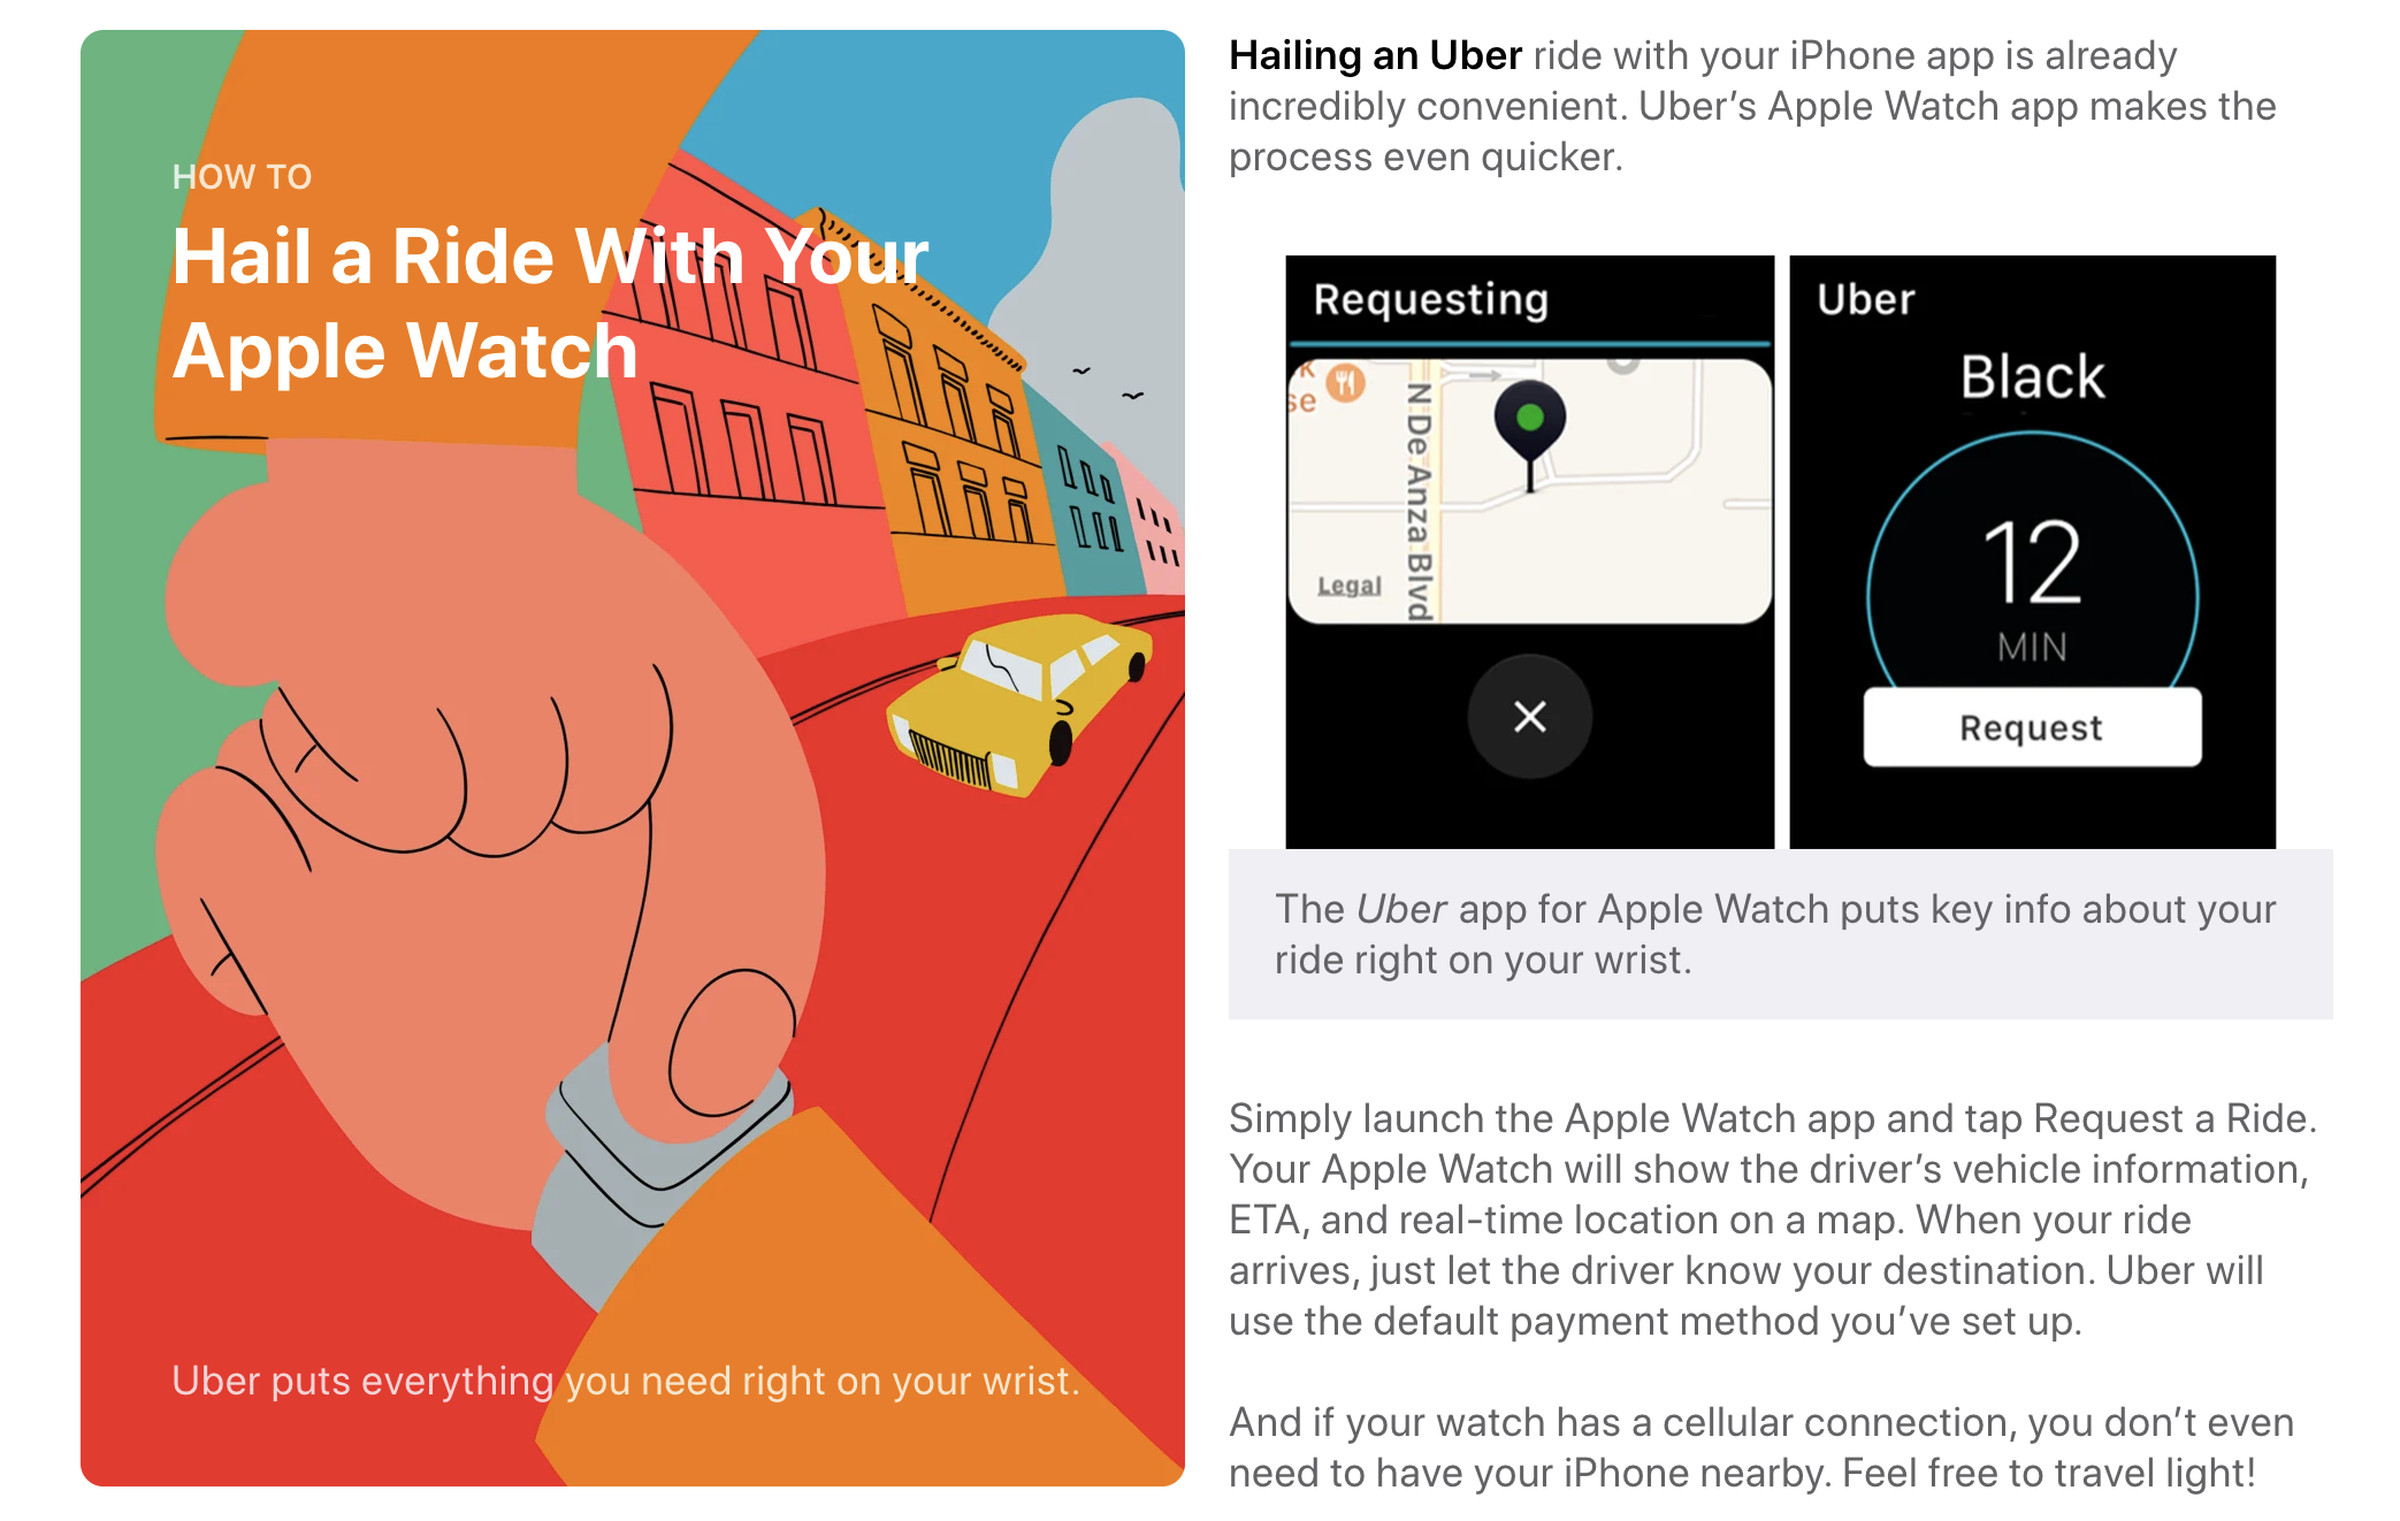 Apple has previously highlighted Uber for the Apple Watch.